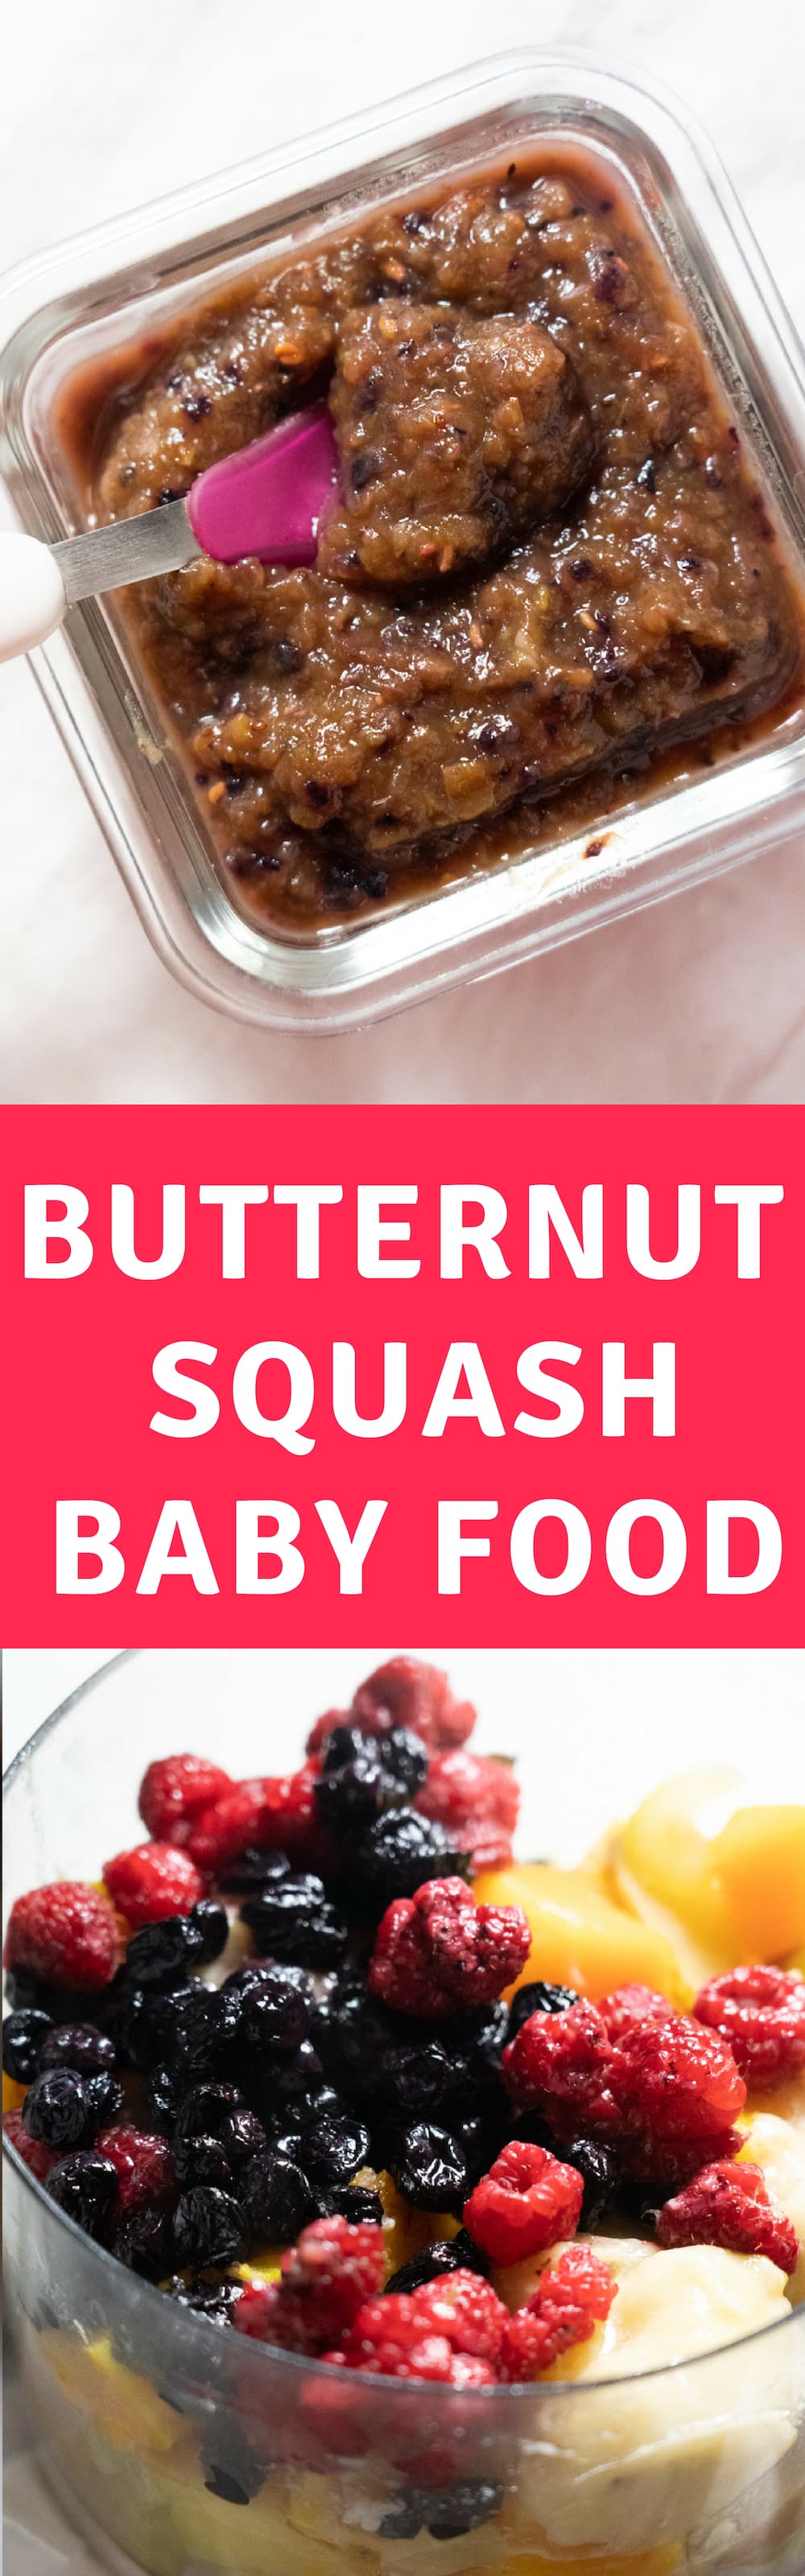 Butternut Squash Baby Food Recipe - Easy With Fruits and ...